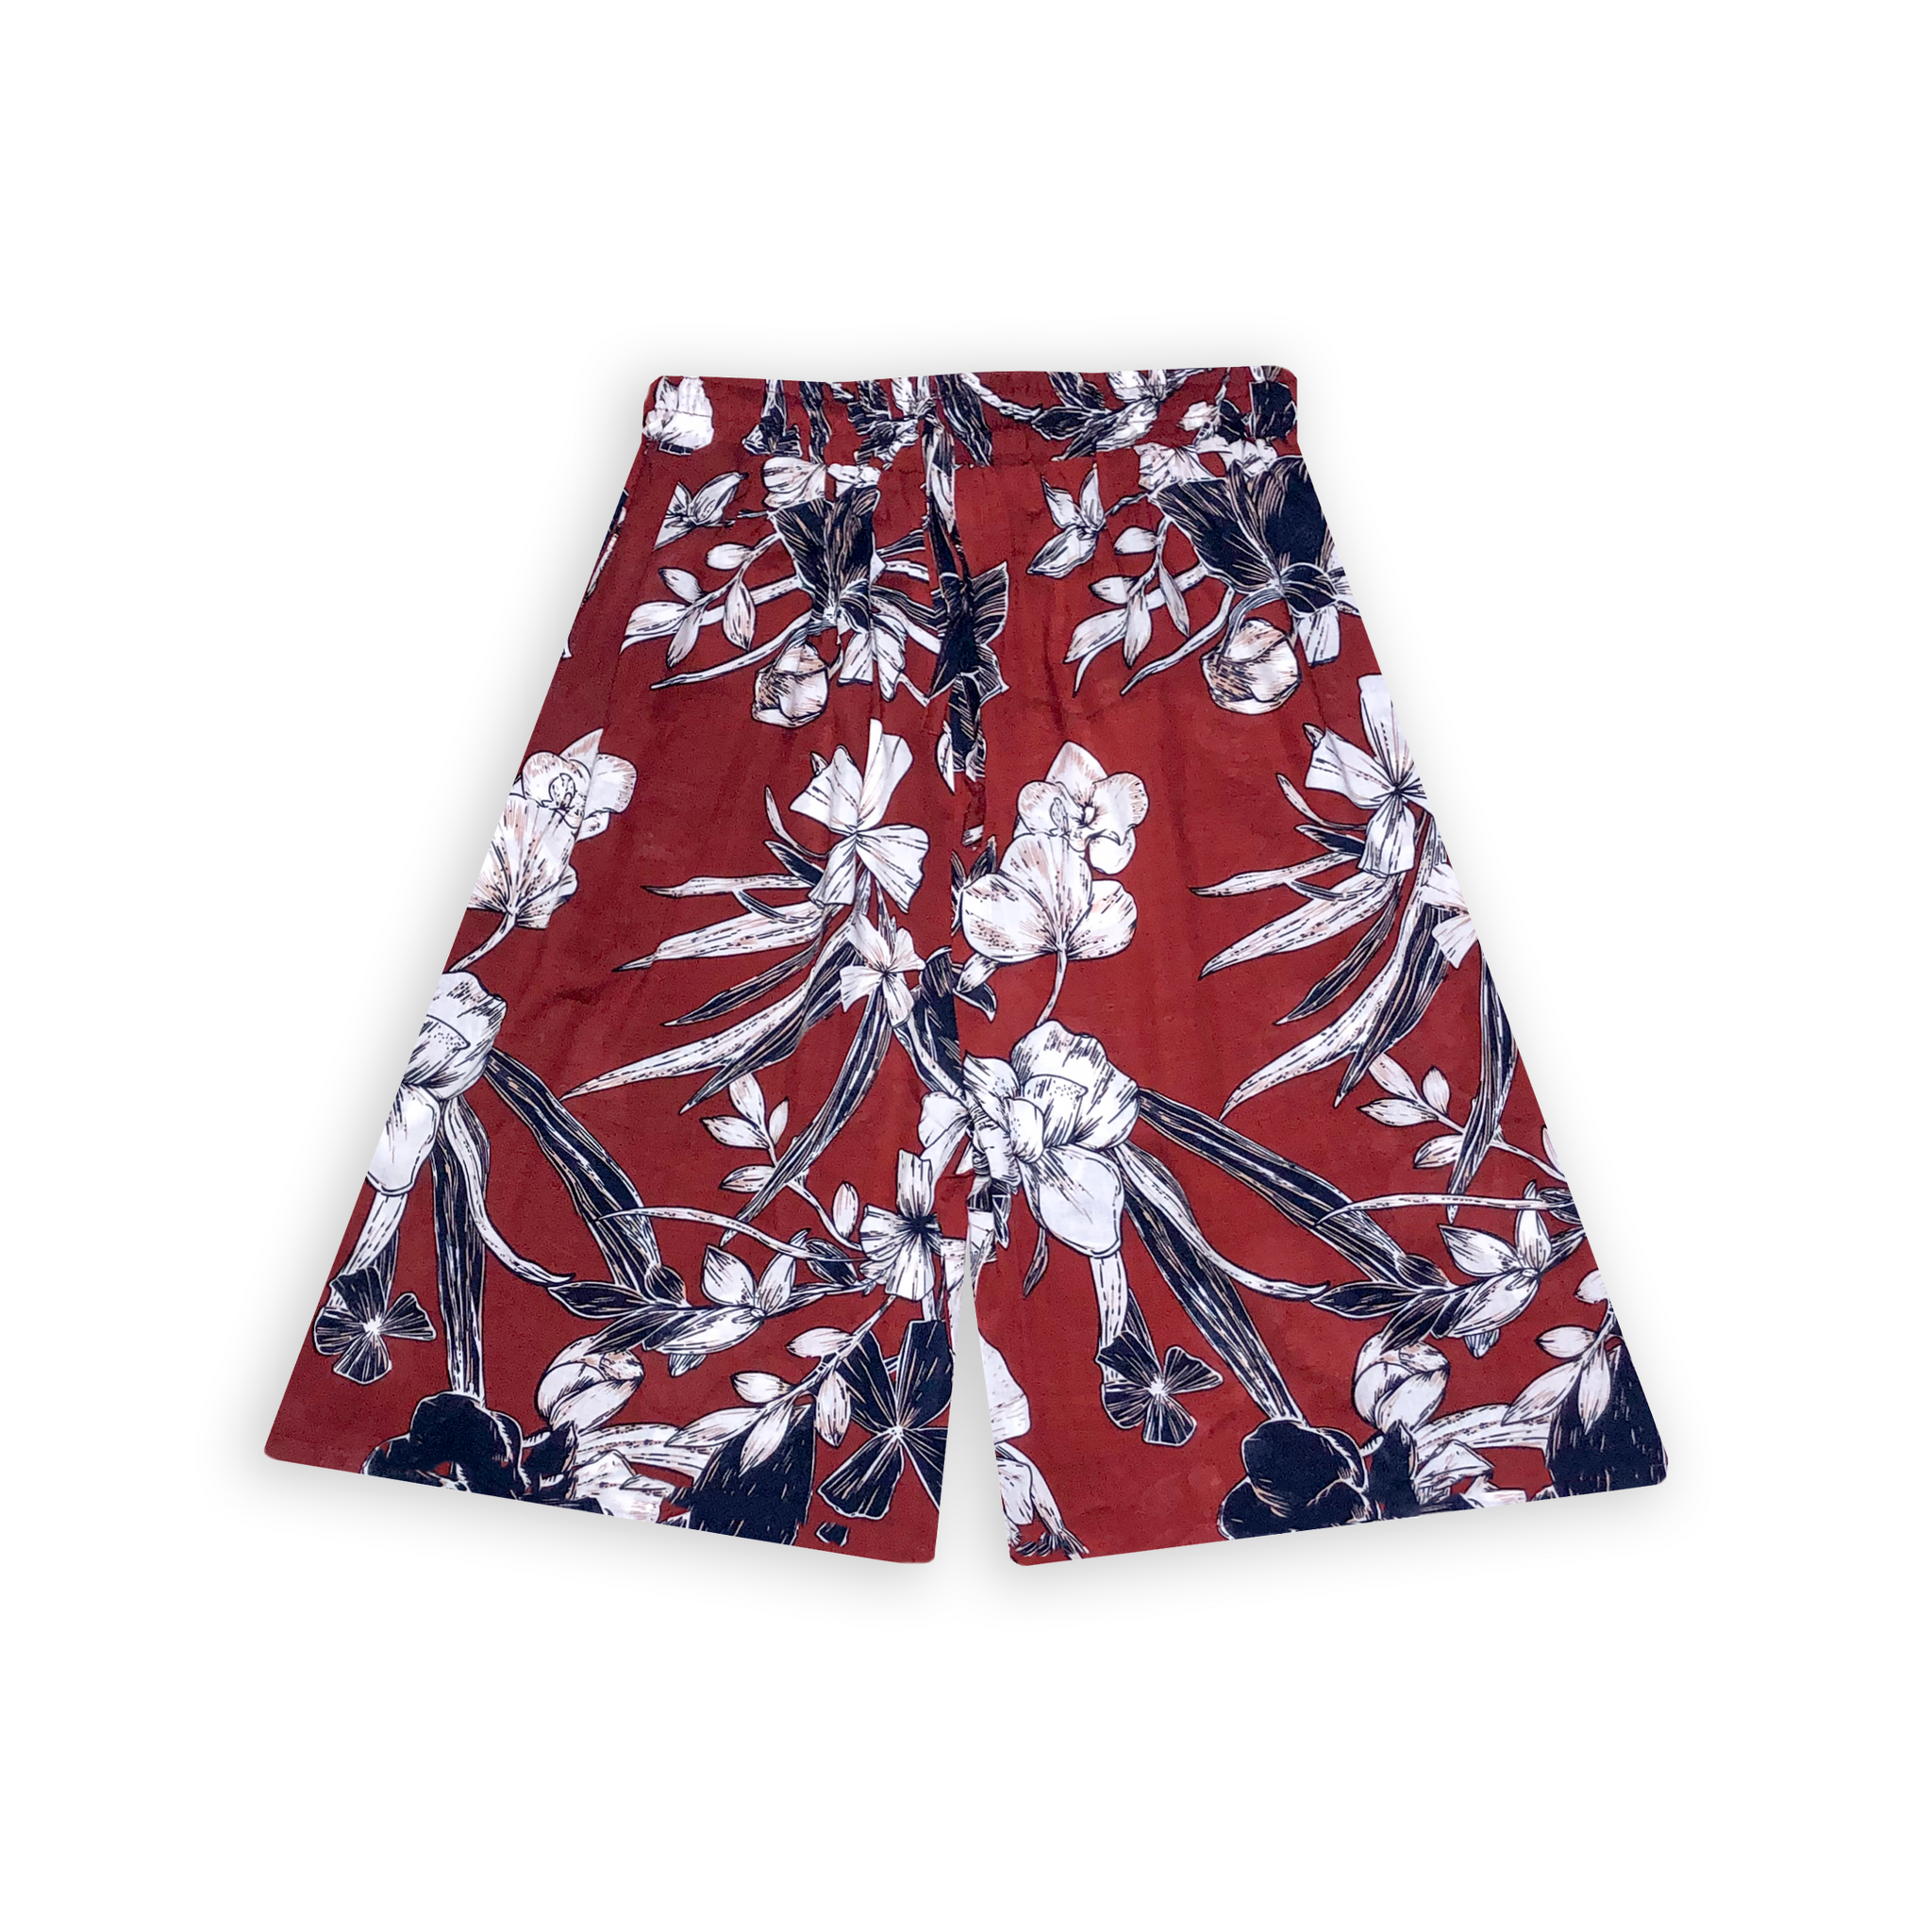 RED SHORTS WITH FLOWER PATTERN